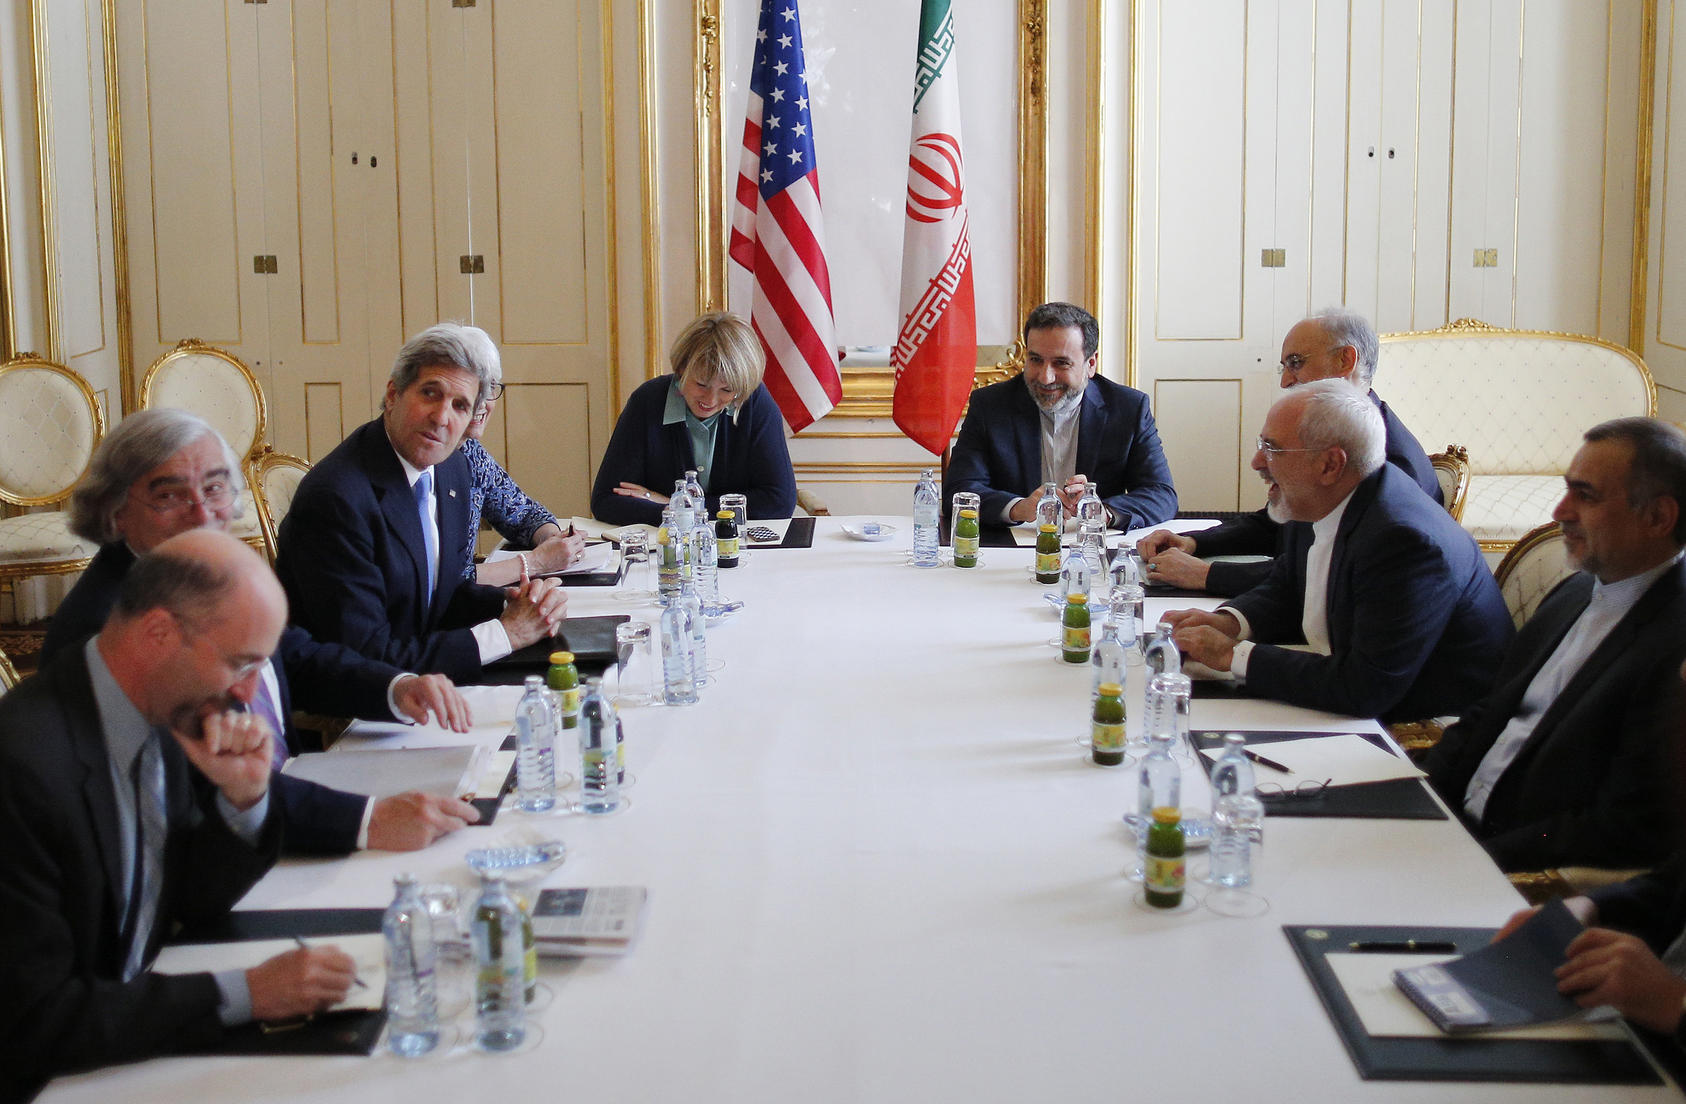 Secretary of State John Kerry, third left, and Iranian Foreign Minister Mohammad Javad Zarif, second right, during a meeting in Vienna, July 1, 2015. While negotiators in Vienna continued high-level talks aimed at reaching a comprehensive accord in Iran’s nuclear program before the recently extended deadline of July 7 Wednesday, it was announced Iranian President Hassan Rouhani will meet with the head of the International Atomic Energy Agency on Thursday in an effort to resolve differences over the inspecti